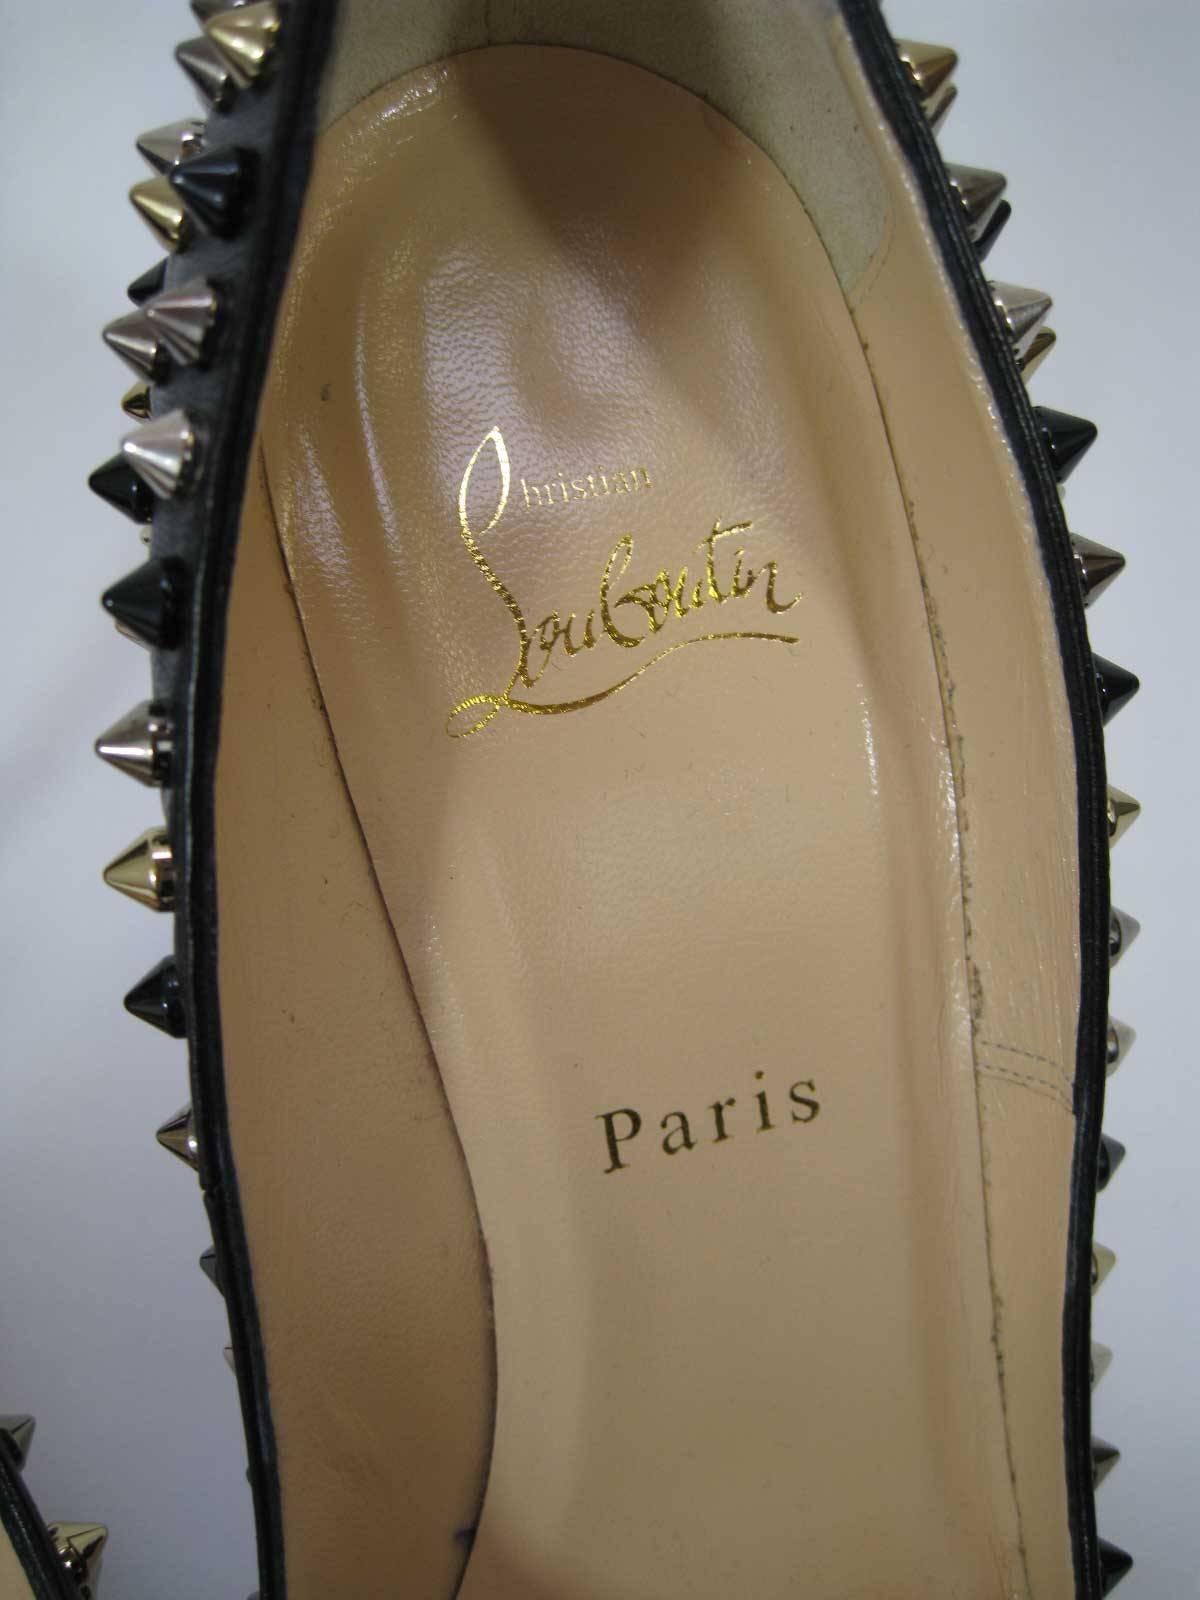 Black Christian Louboutin Pigalle Spikes Studded High Heels 